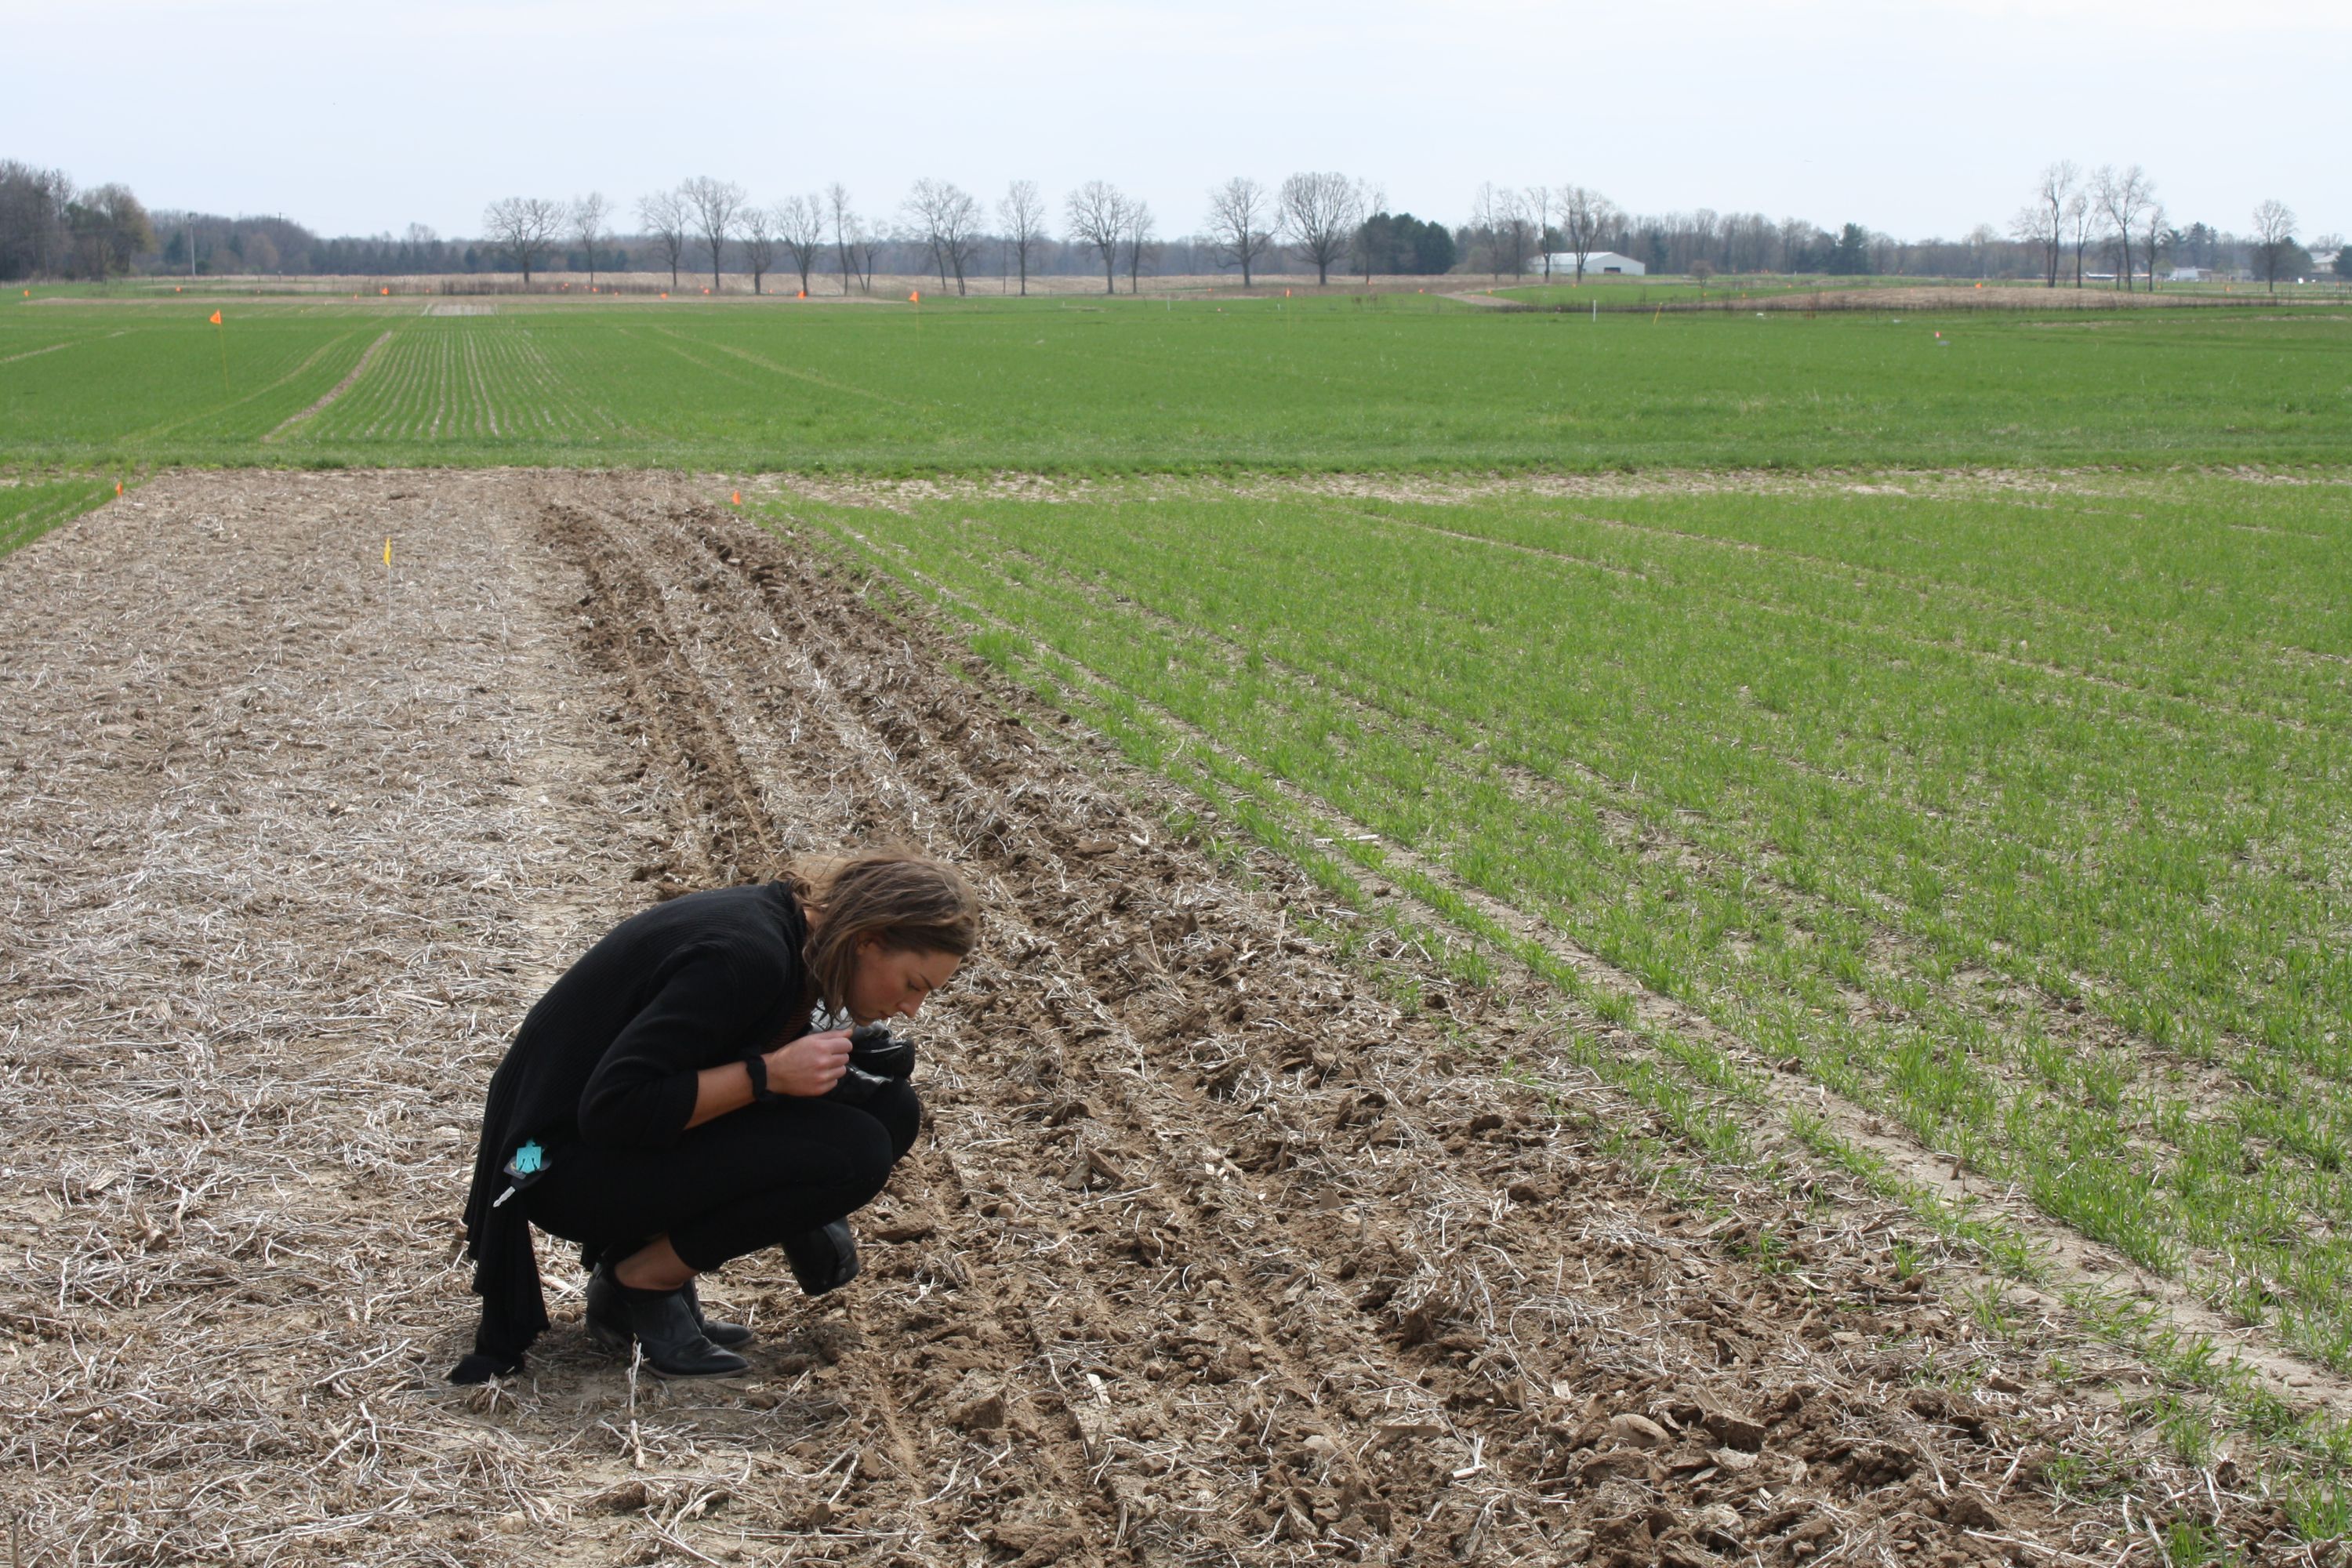 Woman crouches to examine crop field